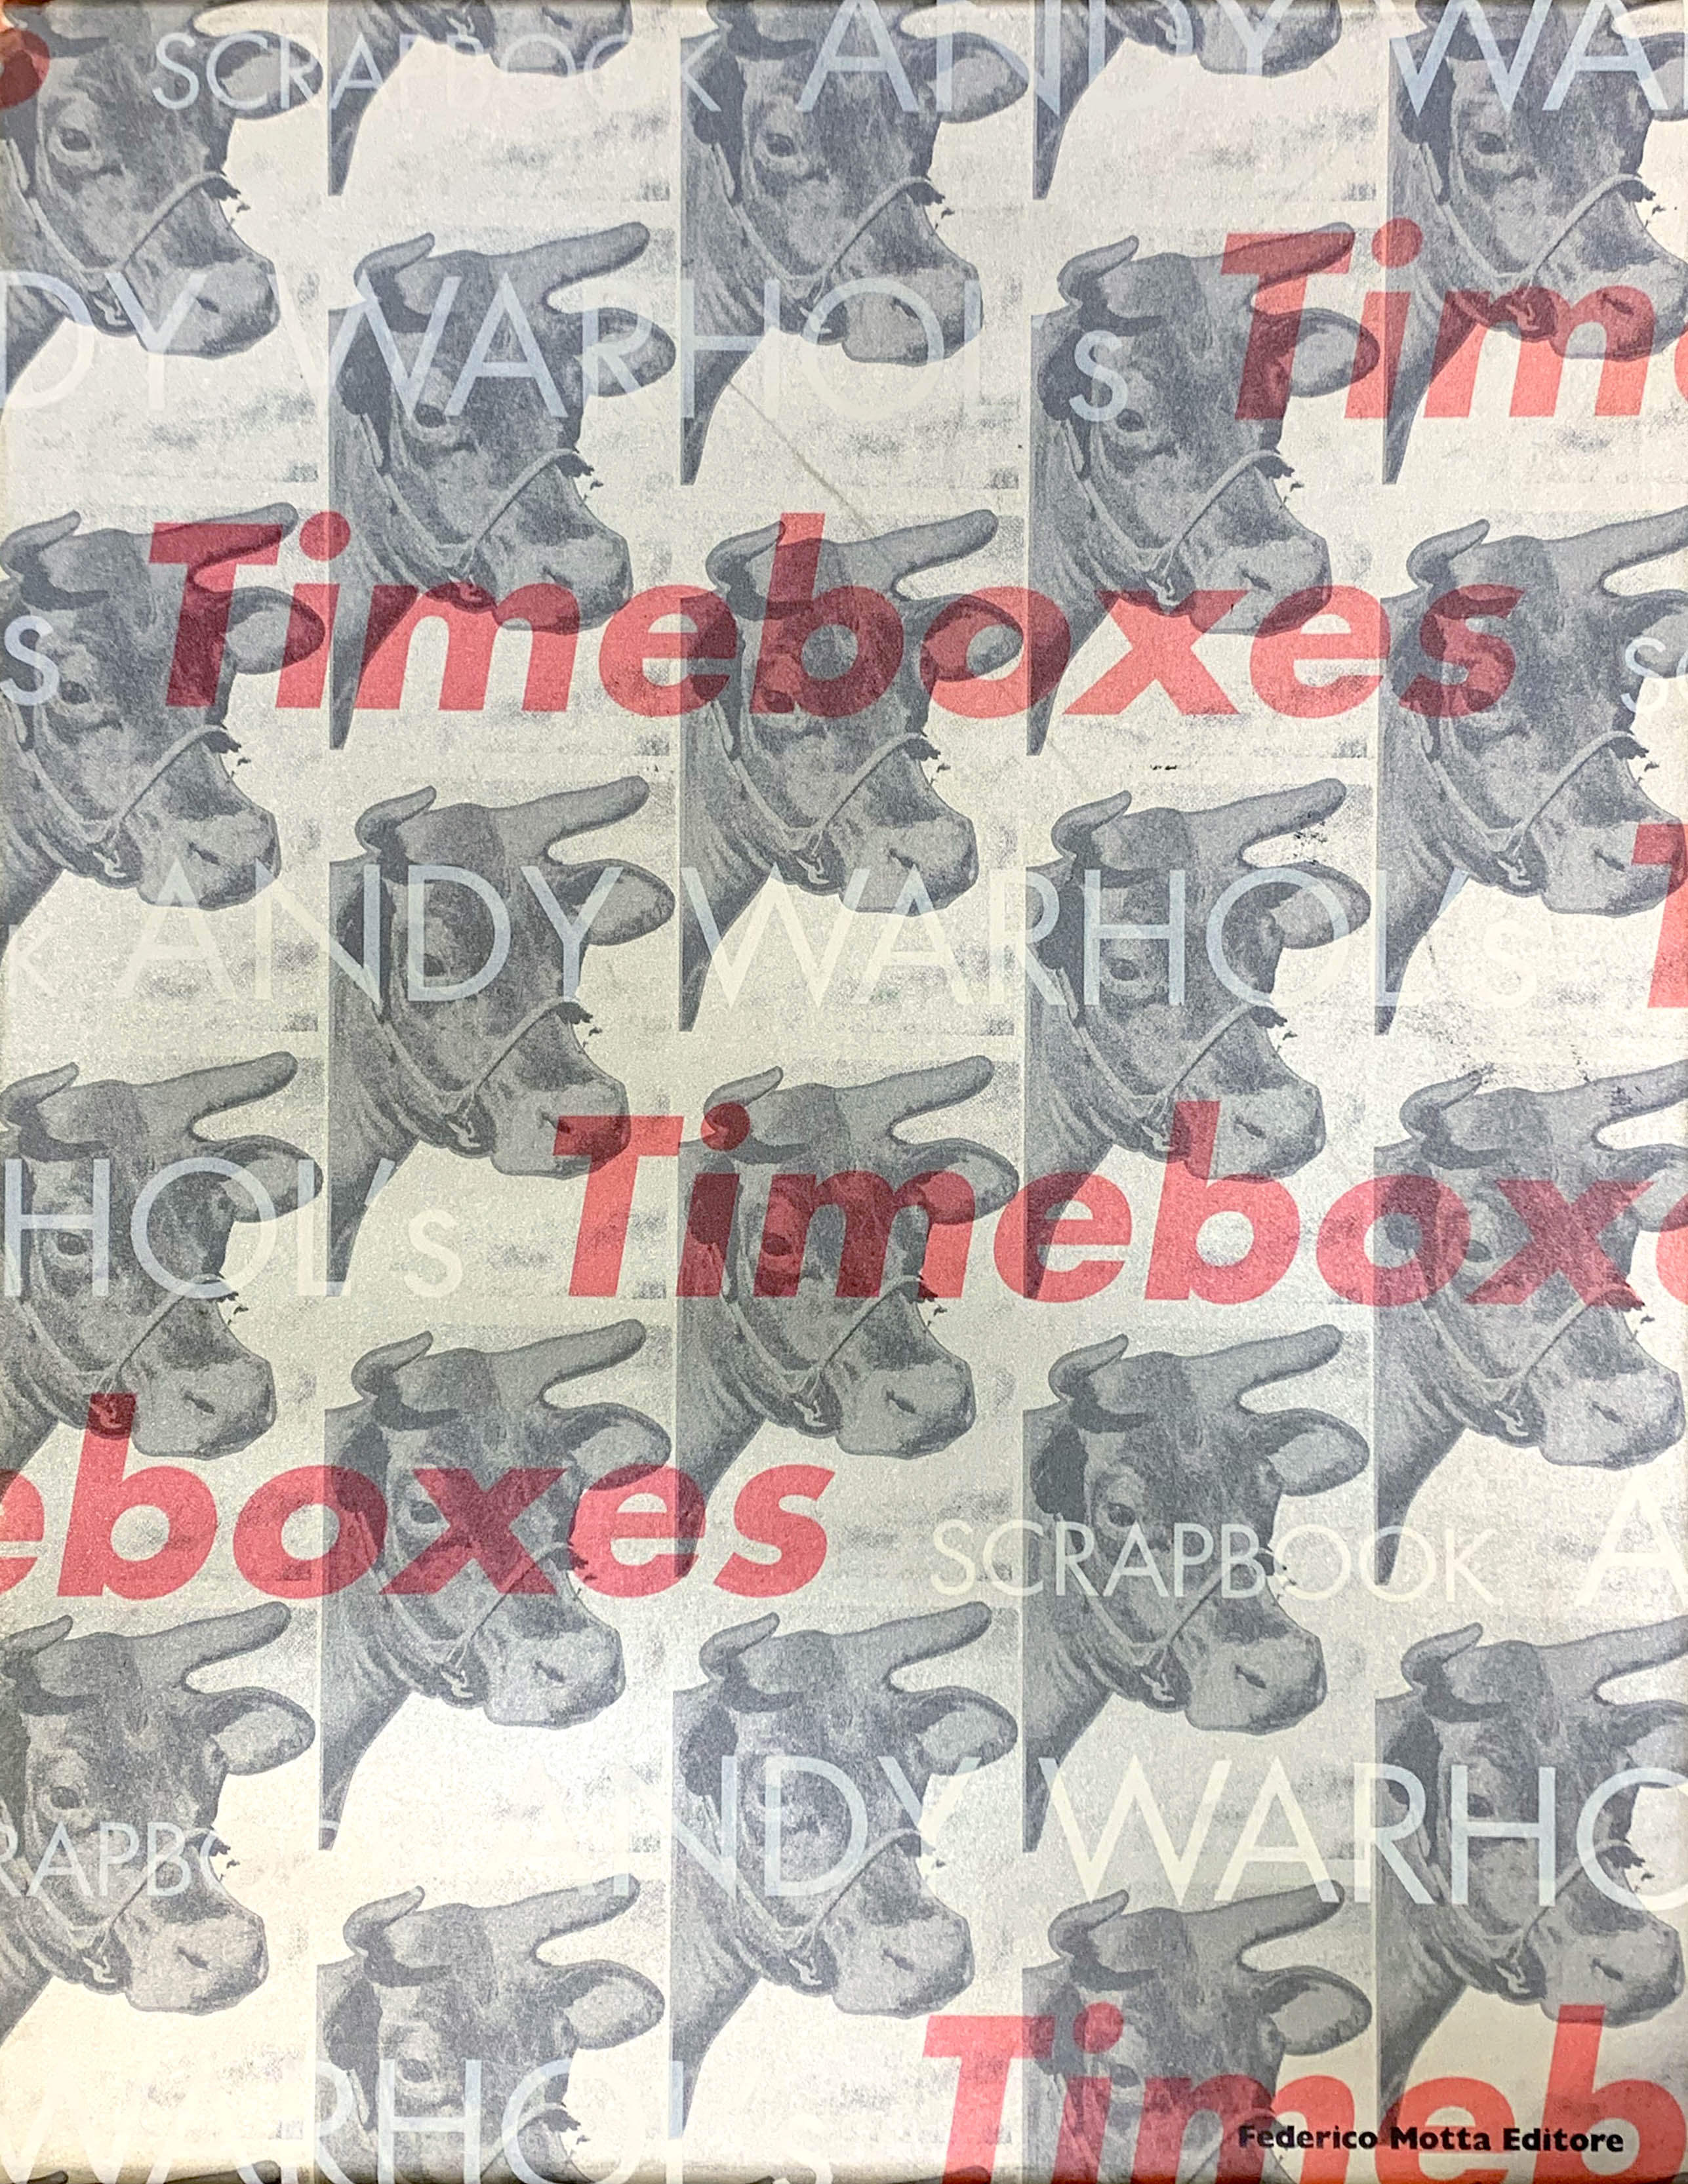 「Andy Warhol's Timeboxes / Andy Warhol」メイン画像